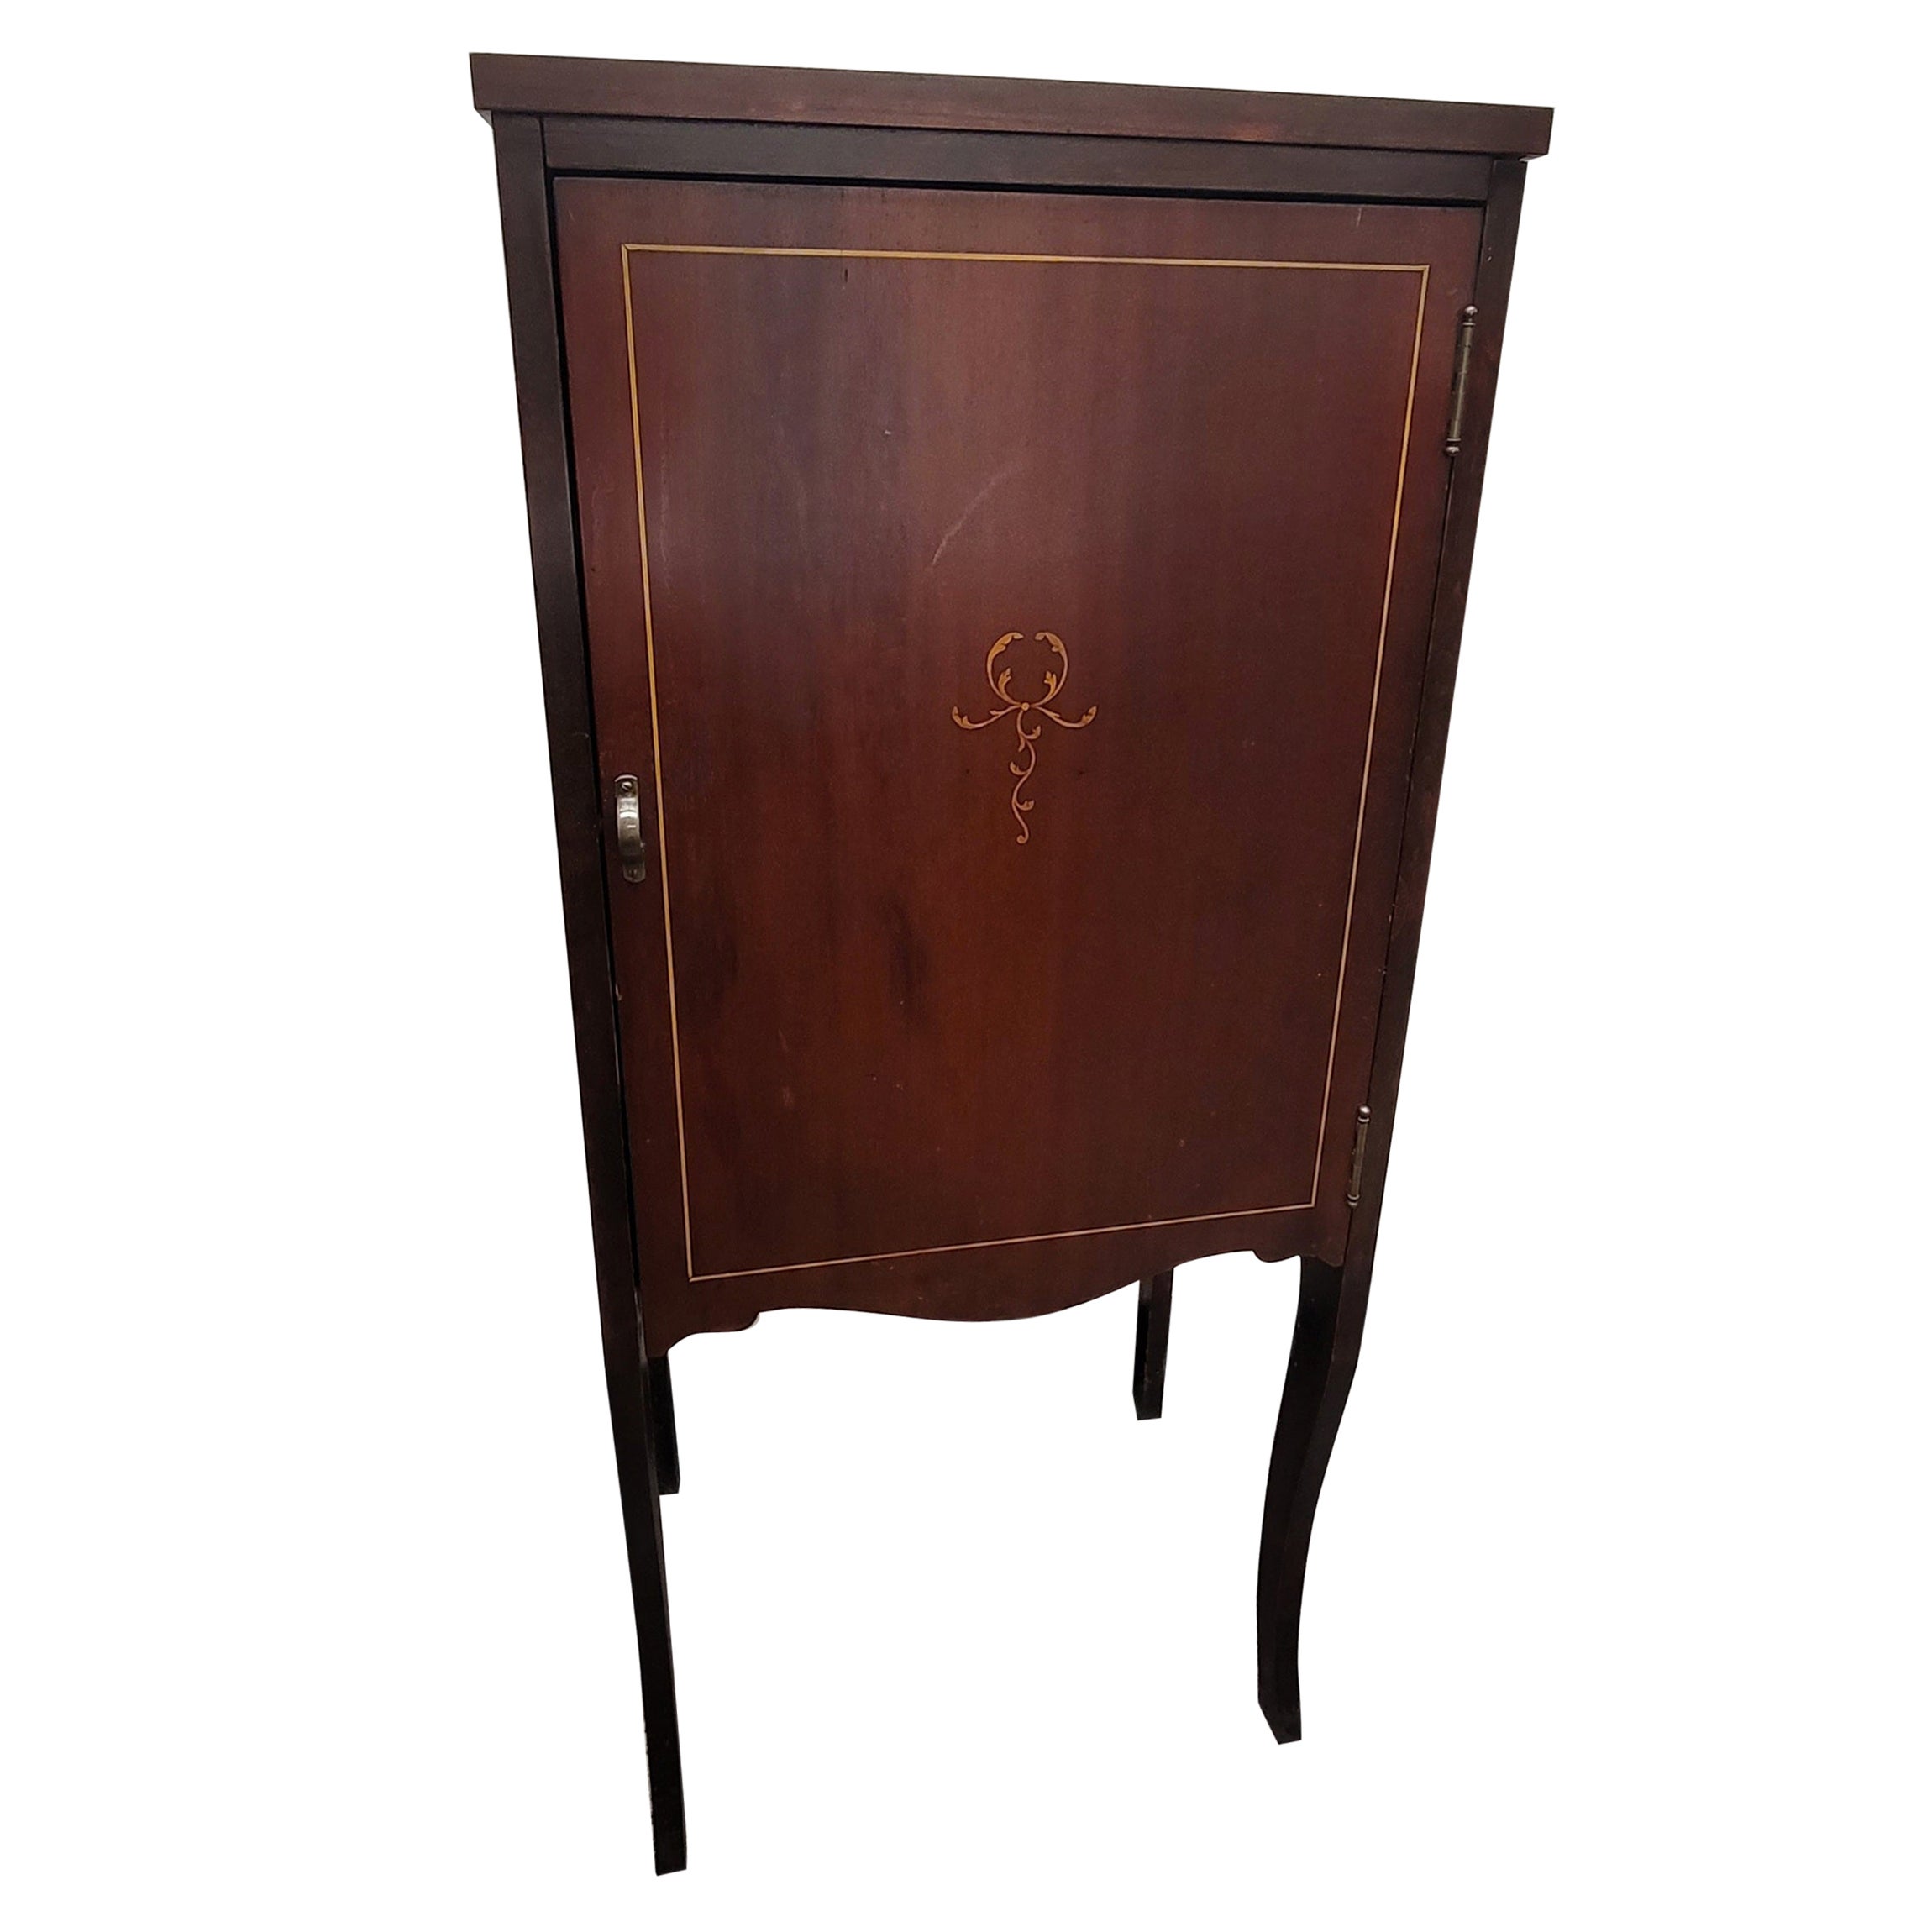 A.I.C. Early 20th C. Edwardian Mahogany Marquetry Satinwood Inlaid Sheet Music Cabinet en vente